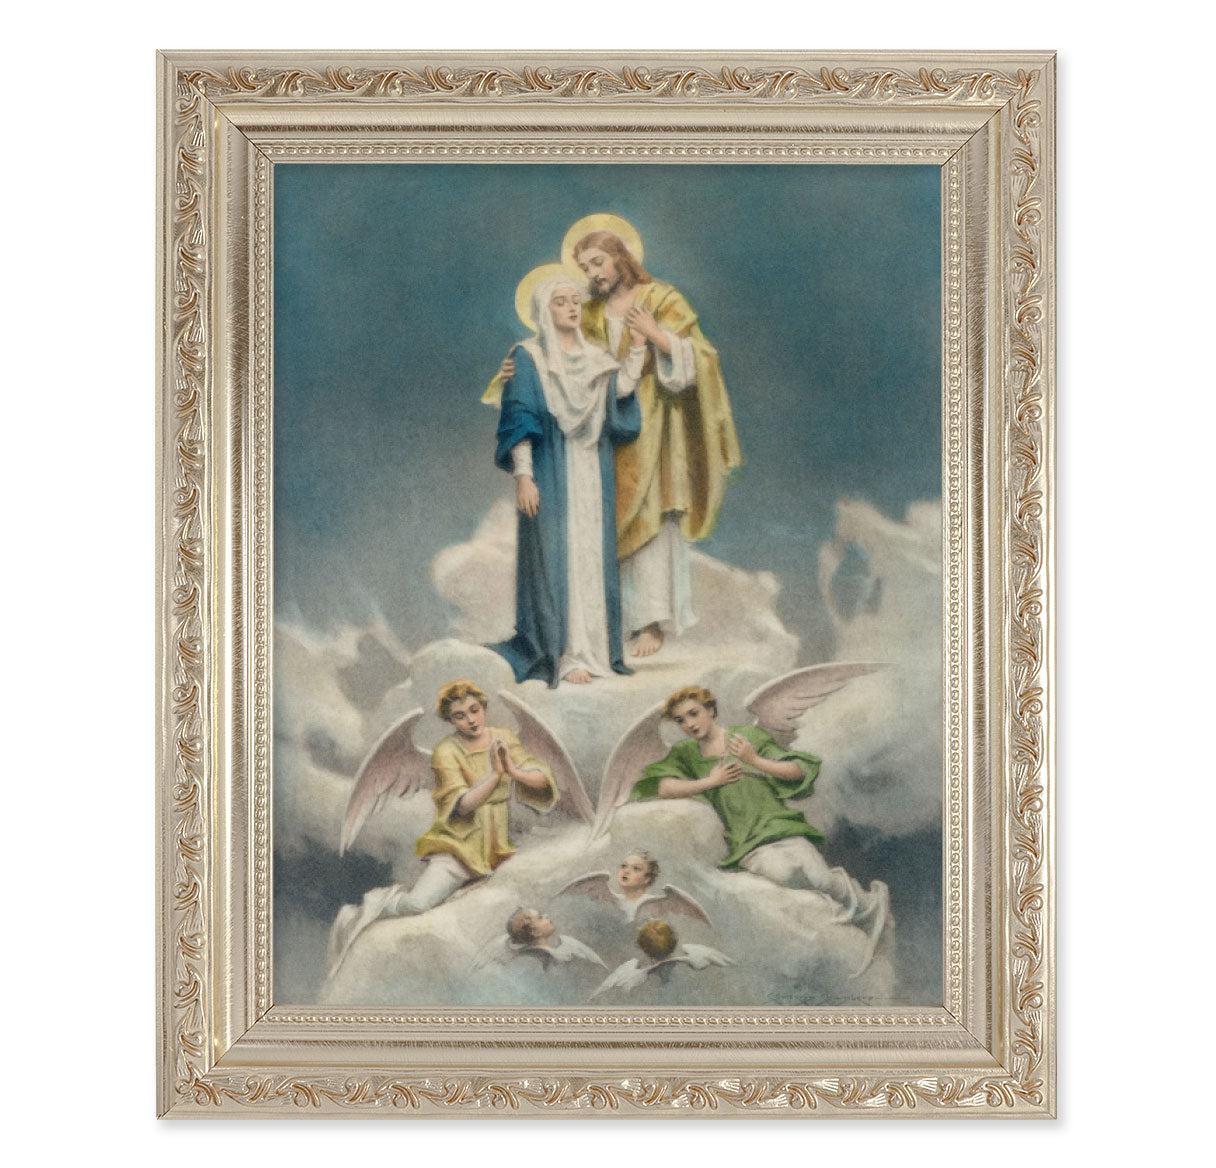 Jesus and Mary Antique Silver Framed Art